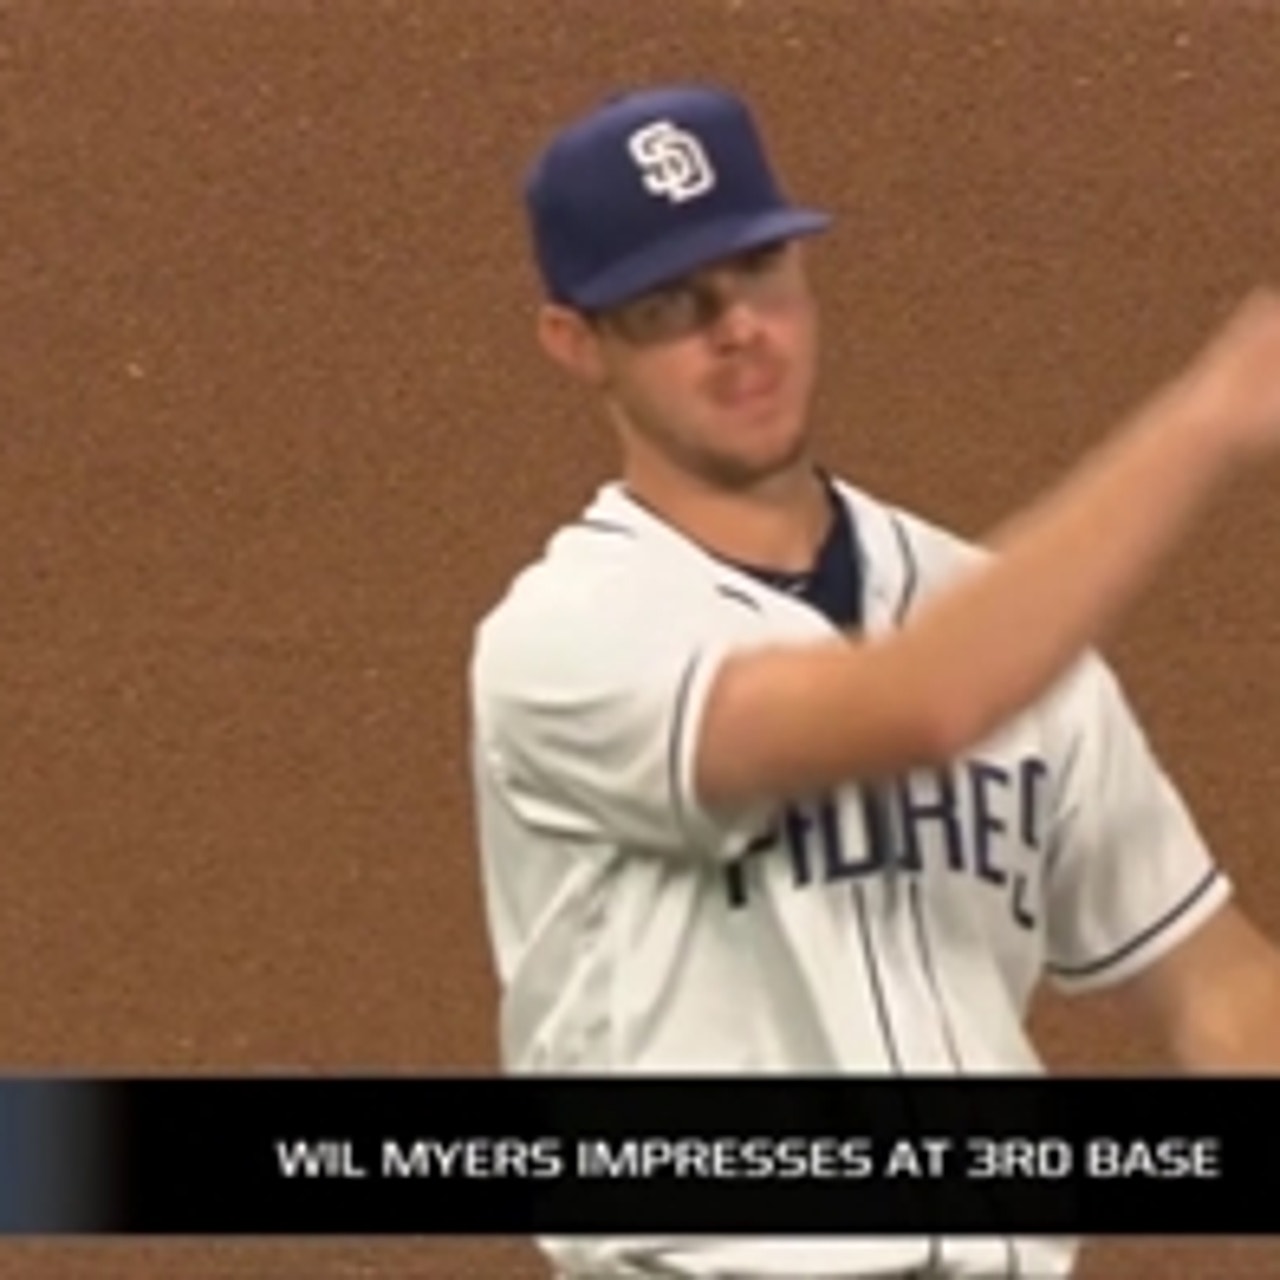 Wil Myers impresses in his 3rd base debut